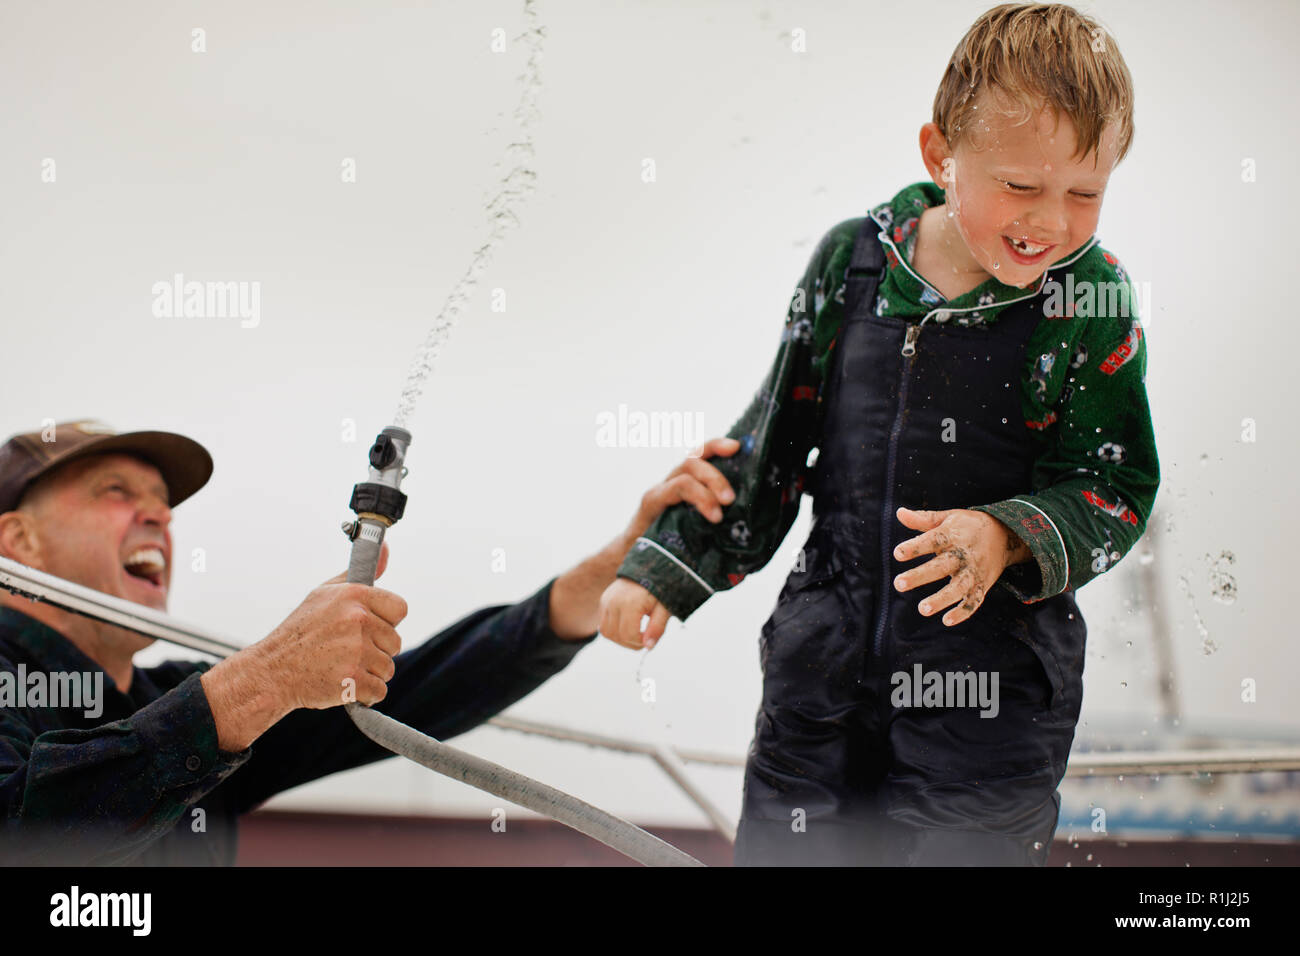 Mature man squirts his young son with garden hose. Stock Photo